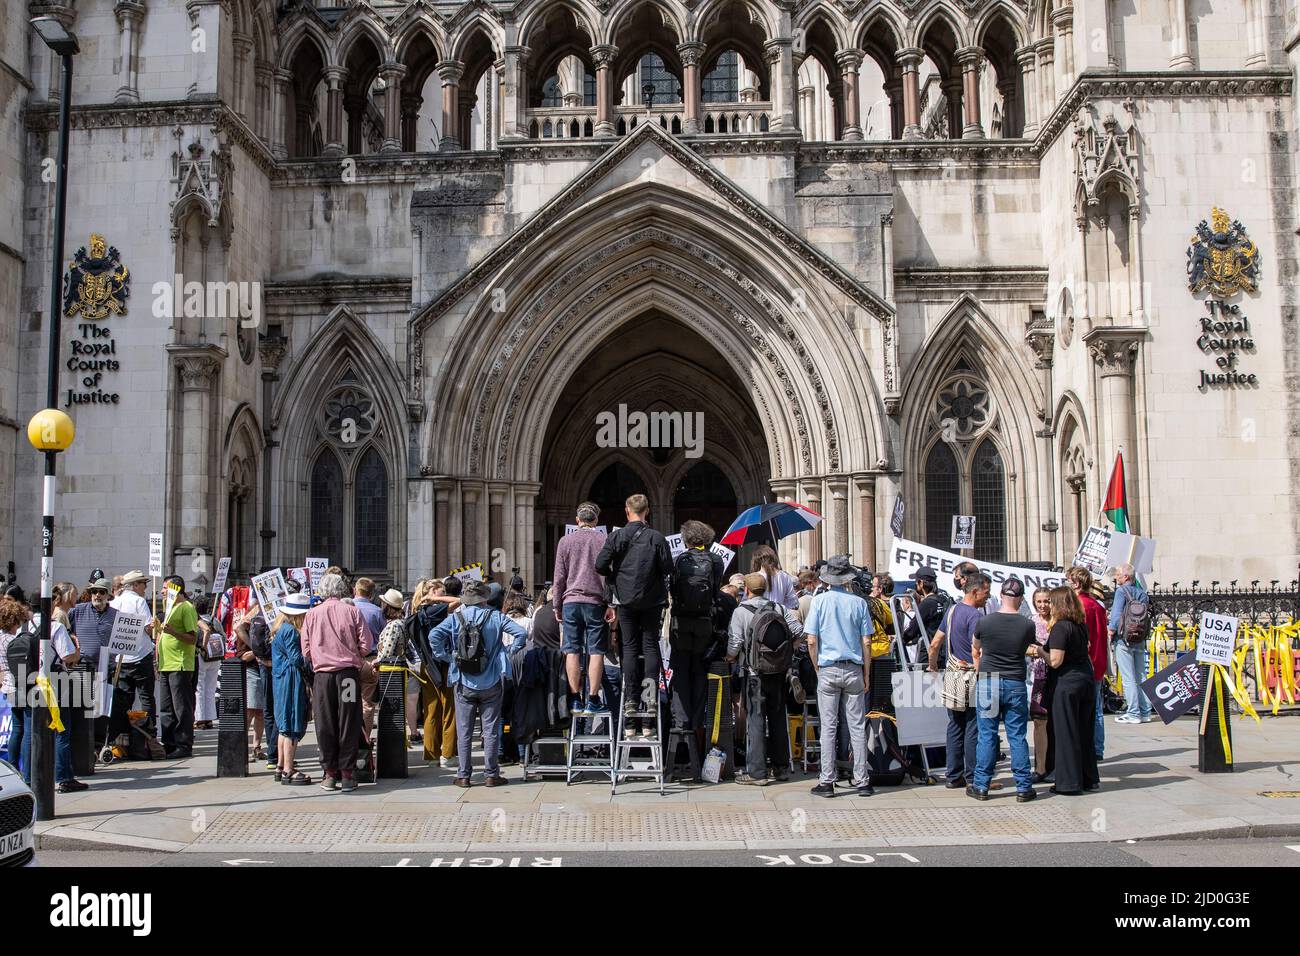 The partner of Wikileaks founder Julian Assange, Stella Moris speaks to the media following a preliminary hearing outside the Royal Courts of Justice Featuring: Atmosphere Where: London, United Kingdom When: 11 Aug 2021 Credit: Phil Lewis/WENN Stock Photo